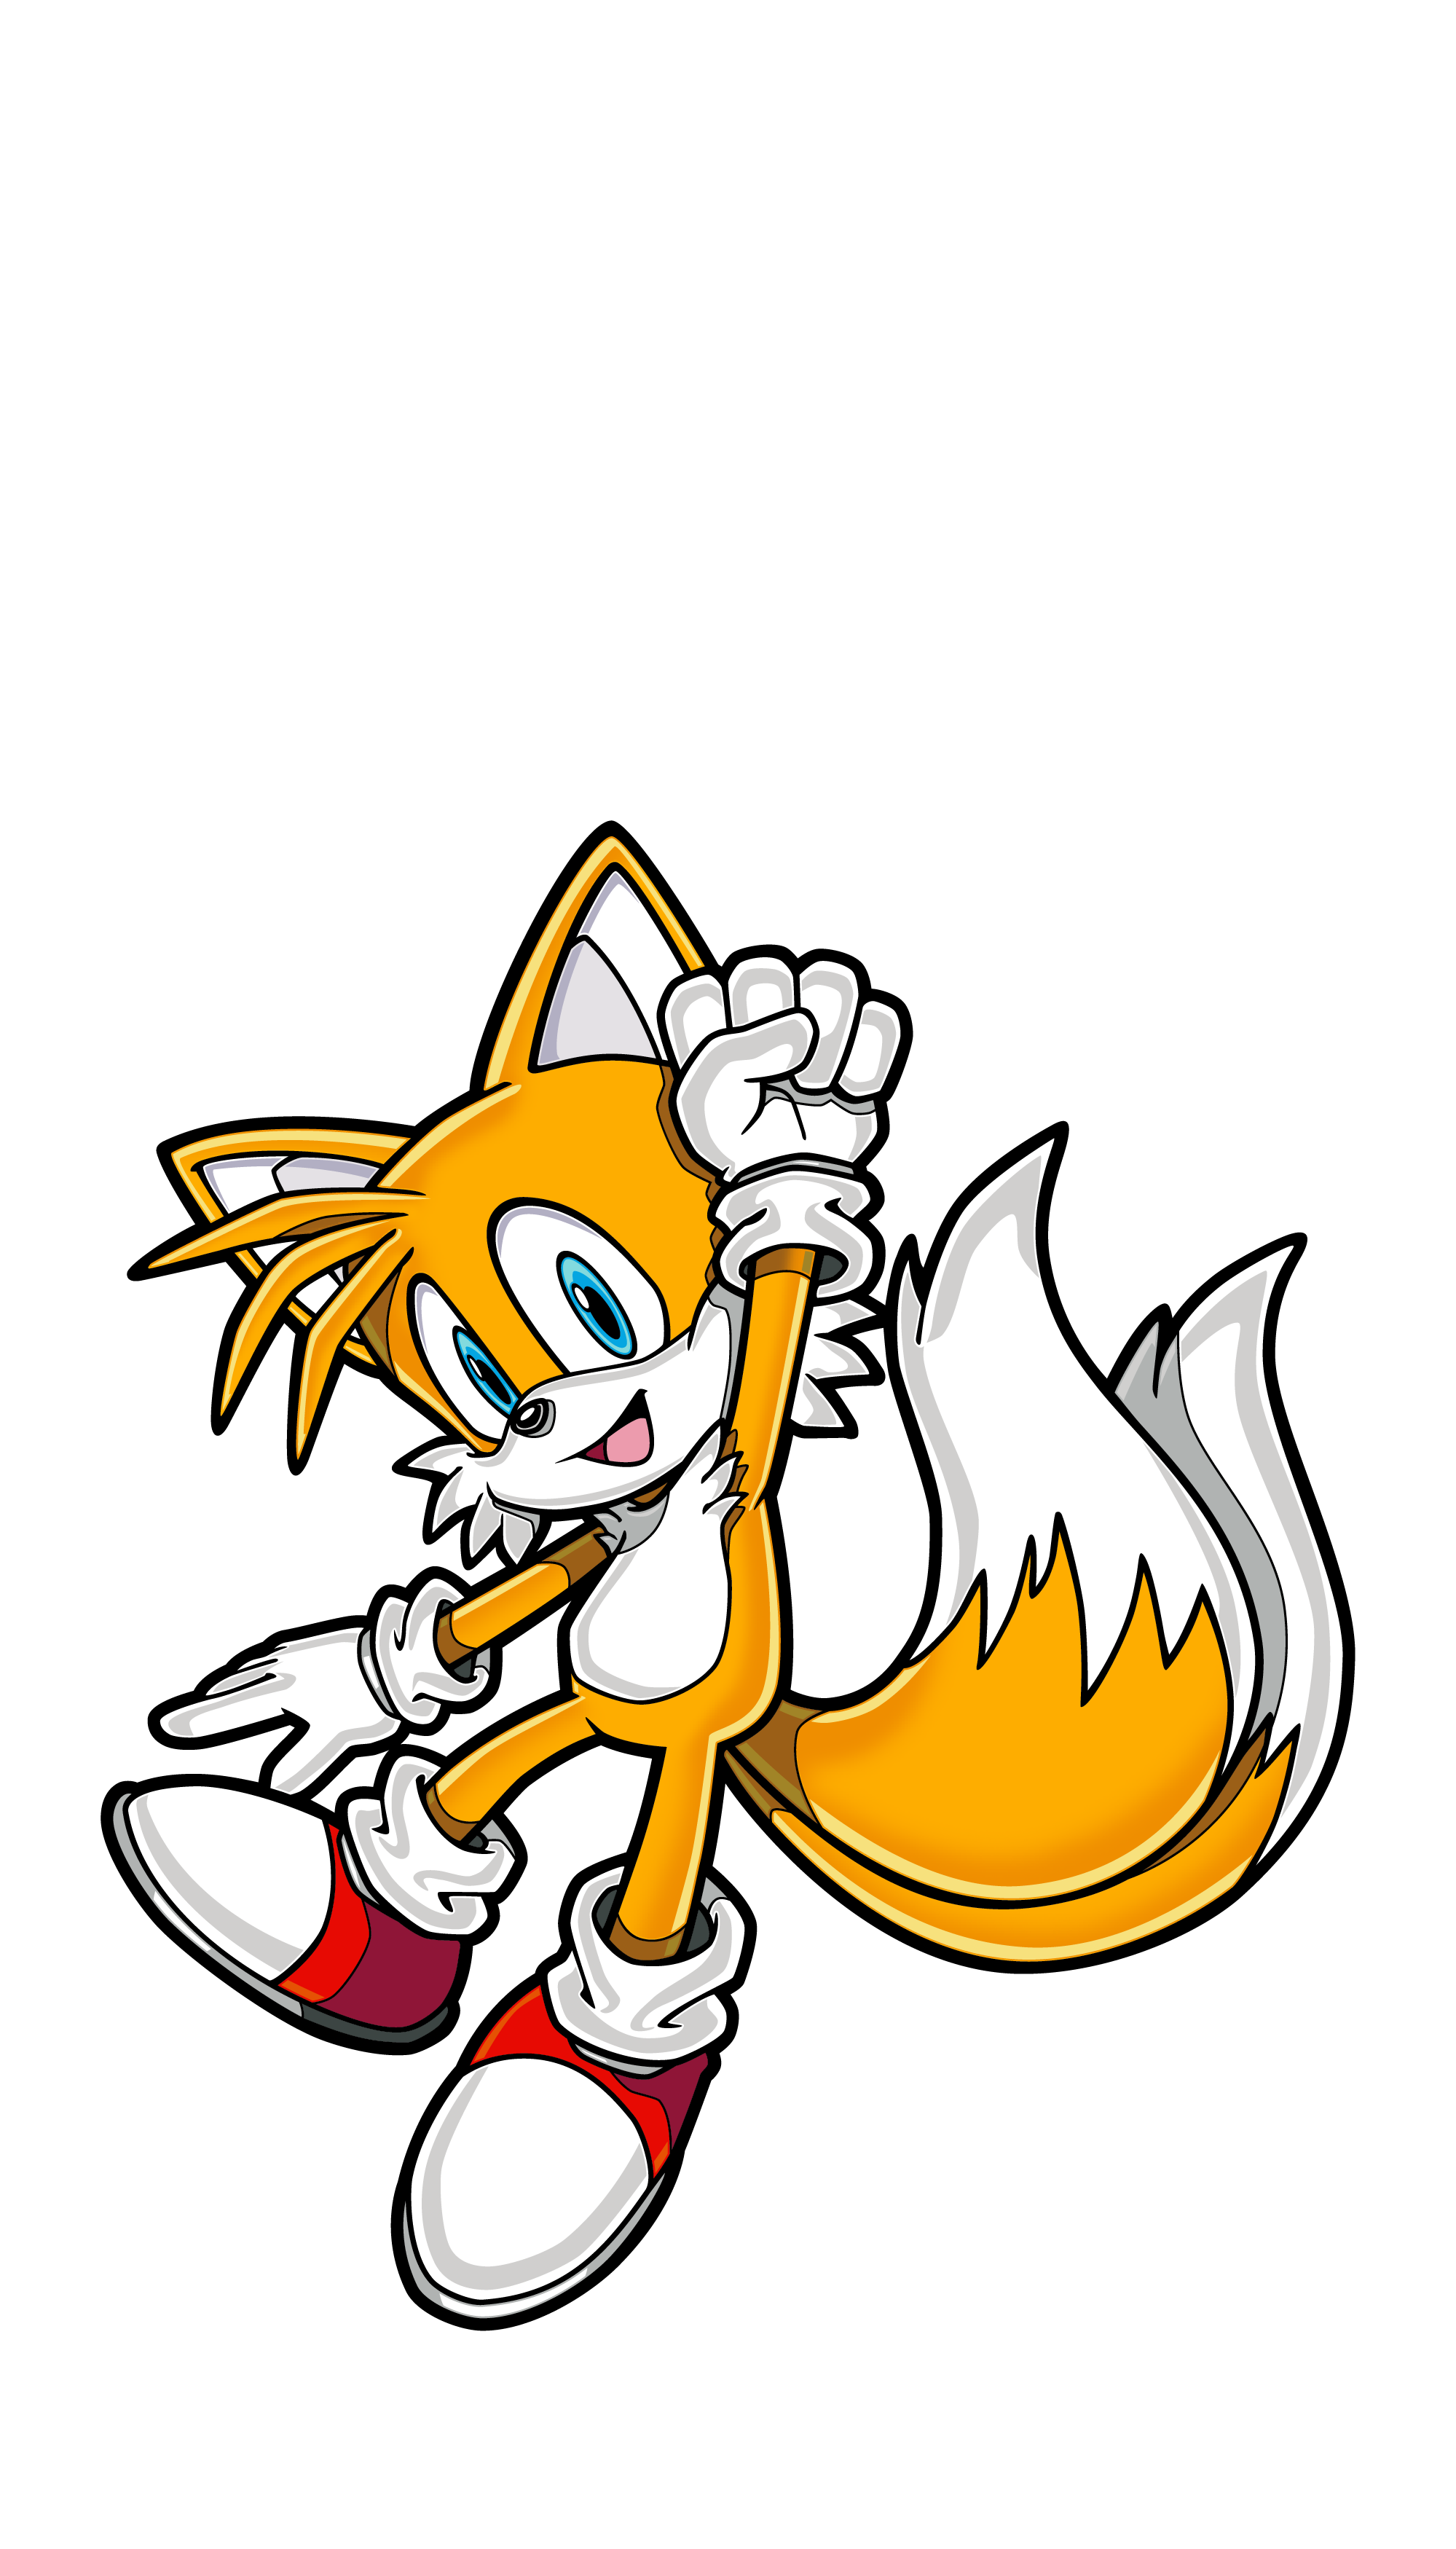 Tails (1353)